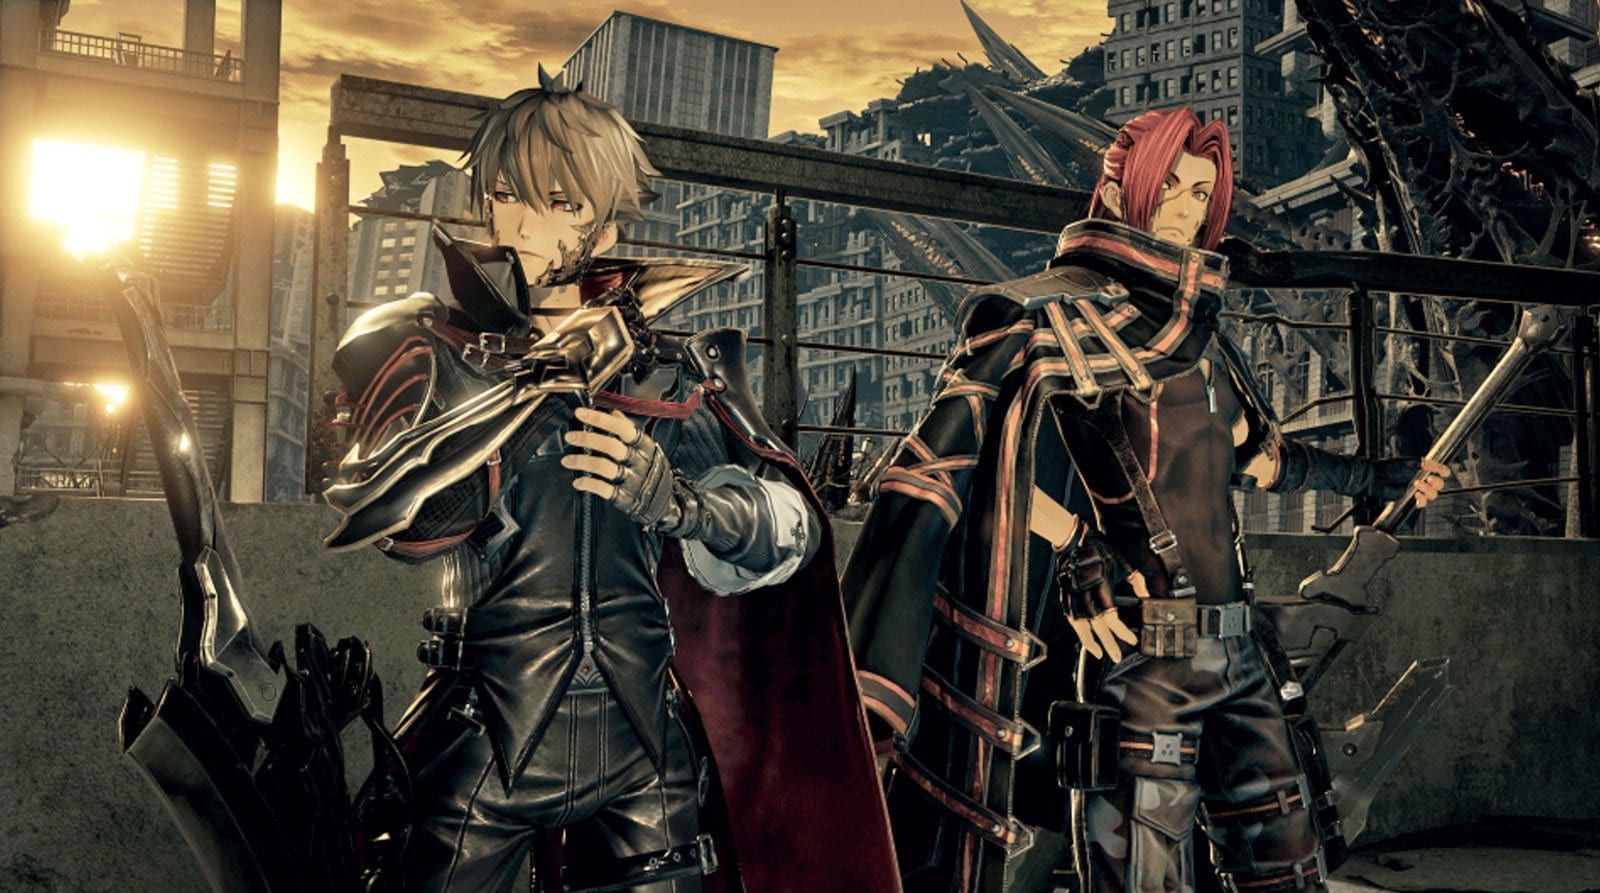 Code Vein Vestiges Locations Guide – How to Restore Gifts and